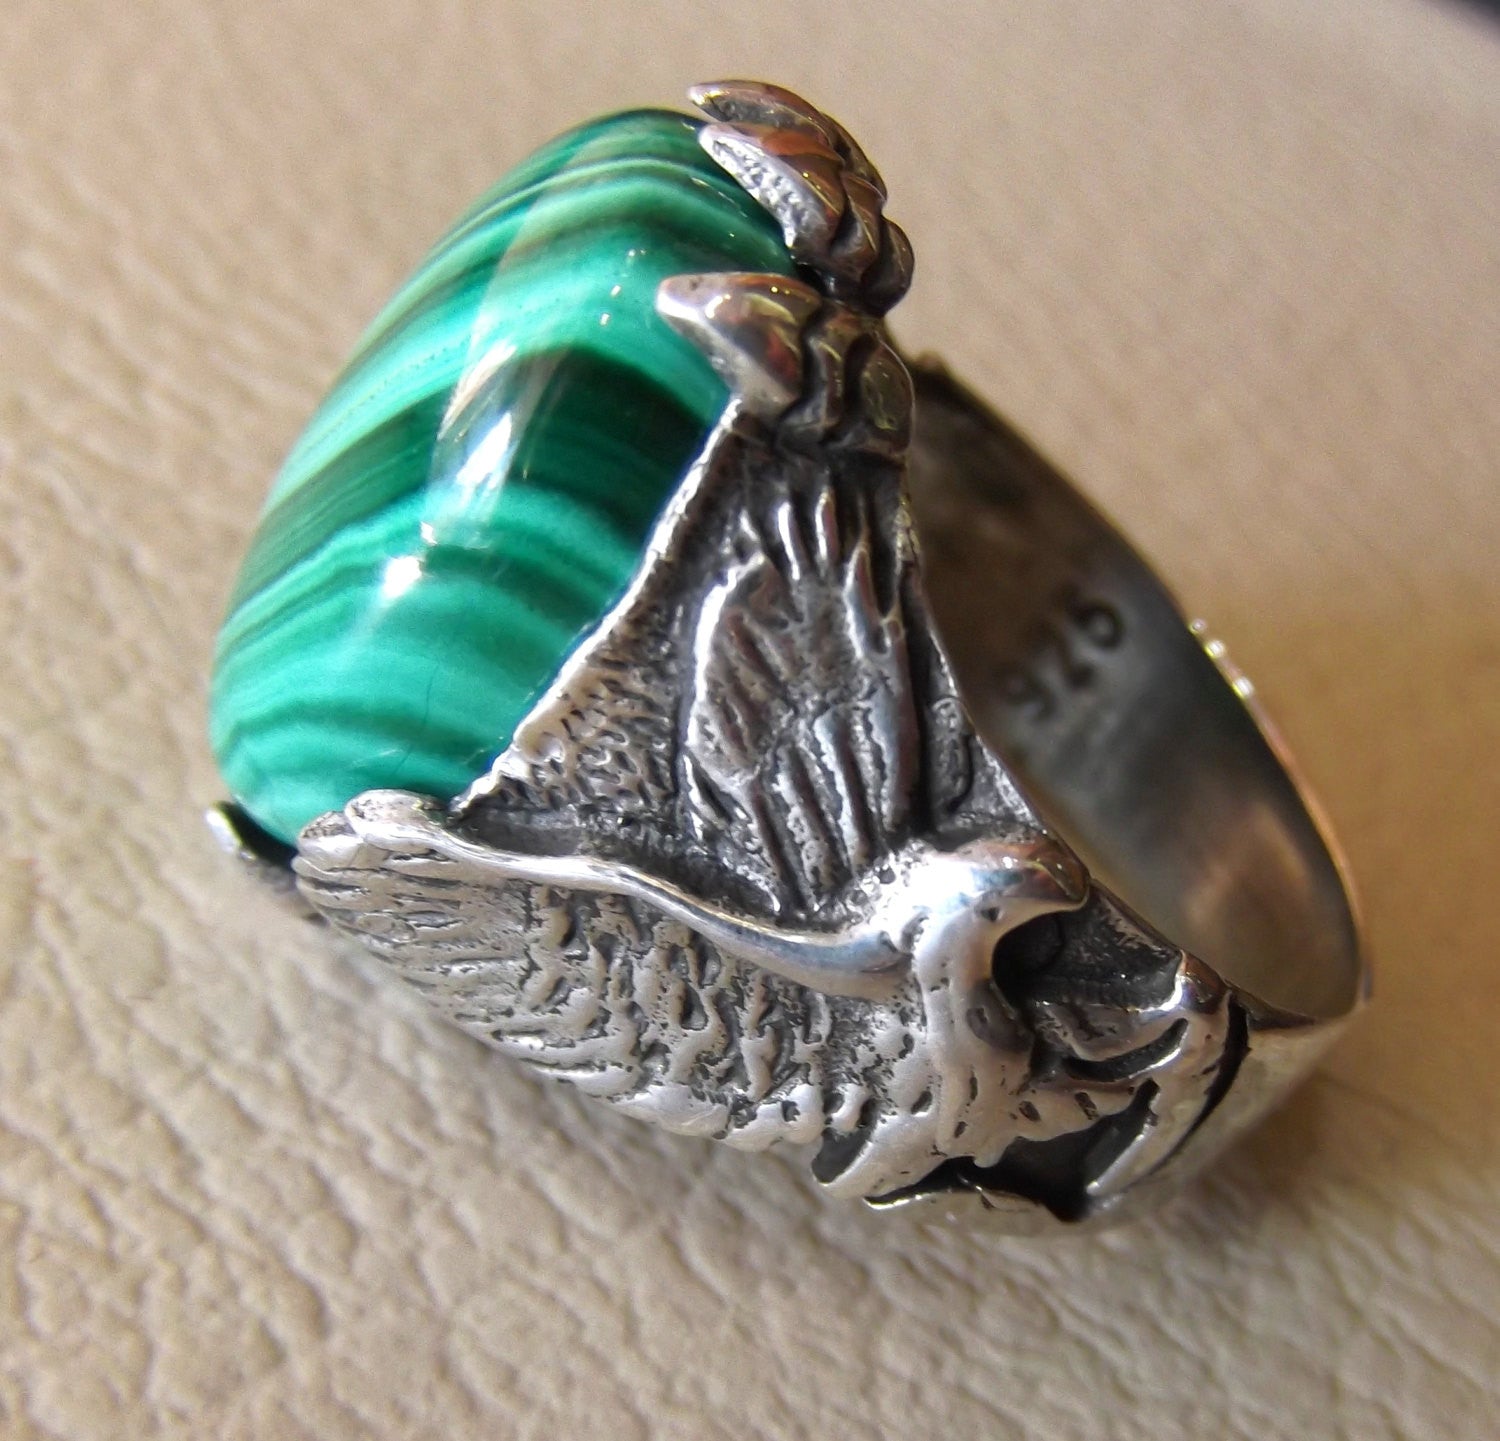 malachite natural green gemstone oval cabochon stone eagle ring sterling silver 925 semi precious any size jewelry man gift fast shipping